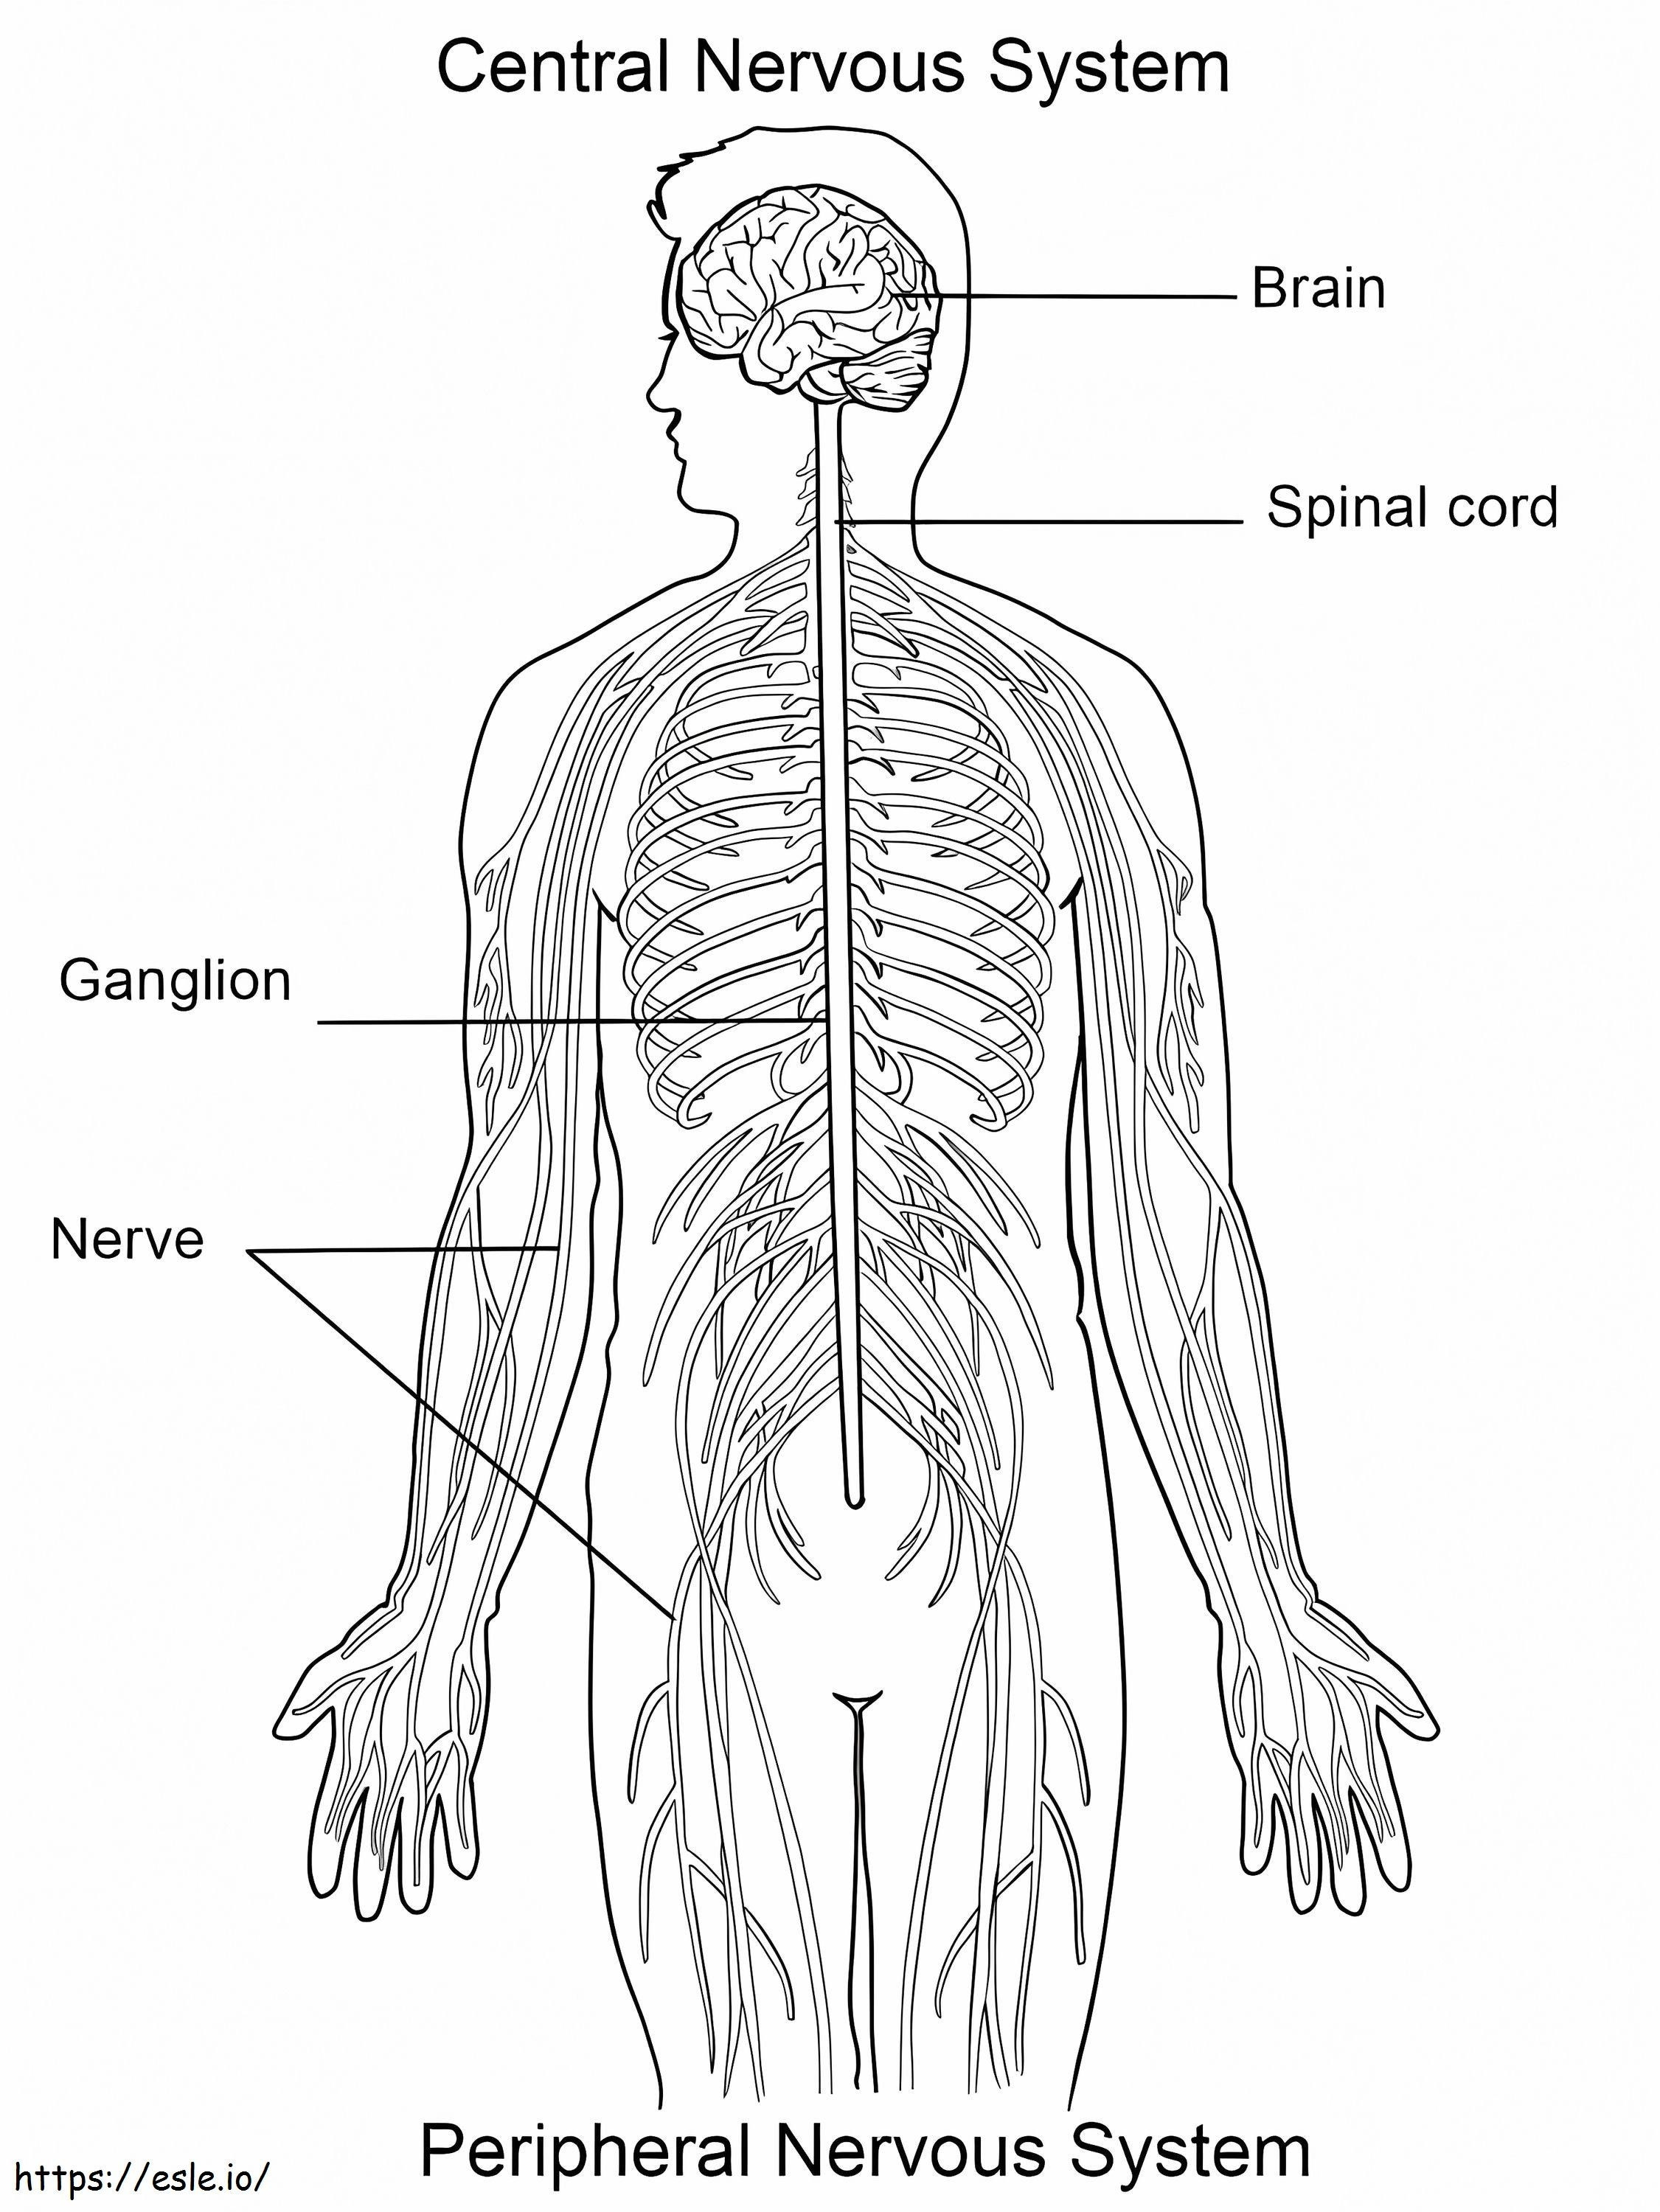 Nervous System coloring page